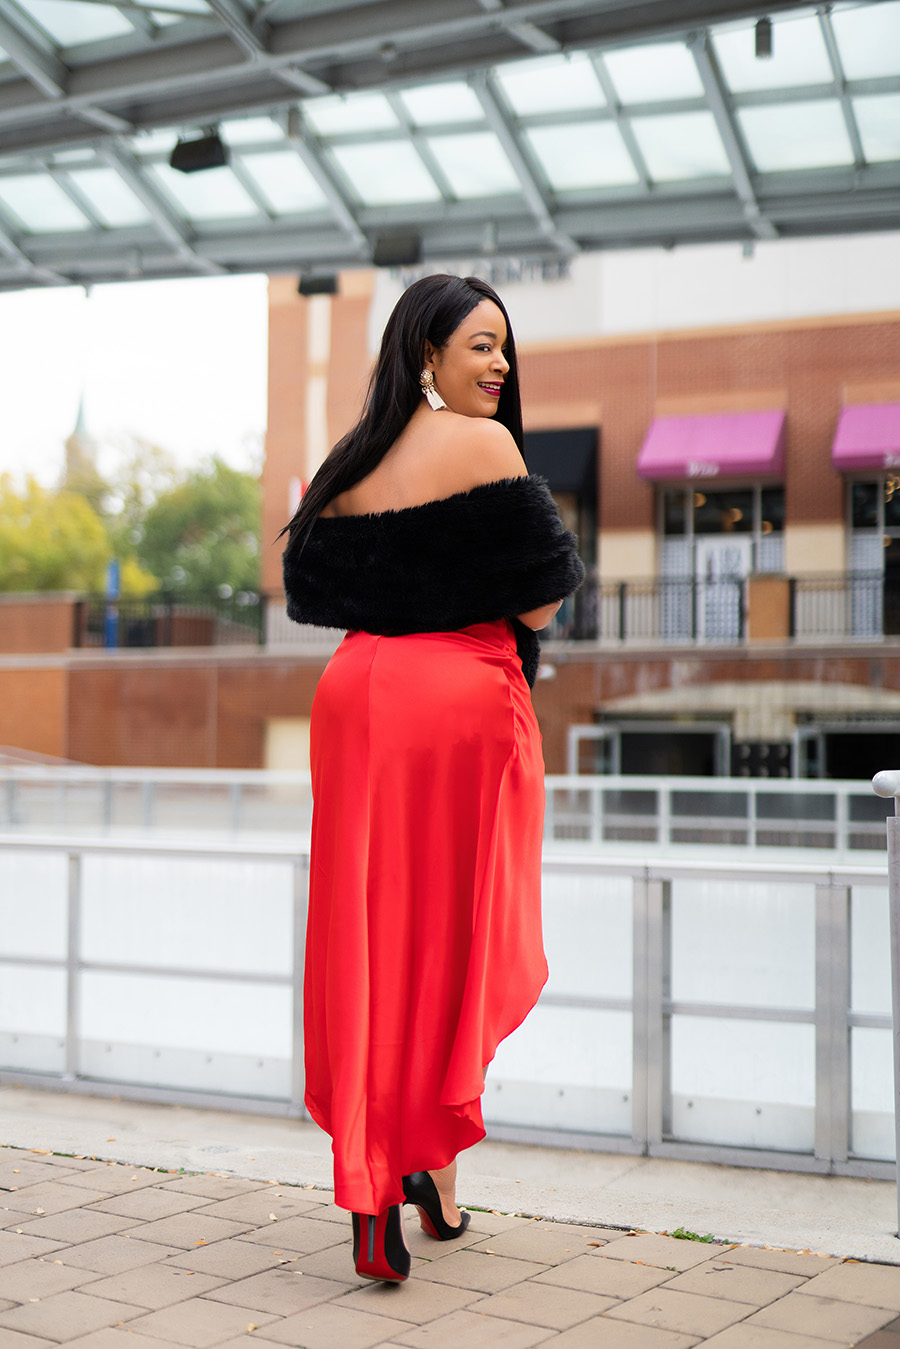 holiday outfit, What's Haute 2019 Holiday outfit ideas, 50 holiday looks, Coco Myles red satin high low dress, Christian Louboutin Pigalle pumps, Zara faux fur scarf, H&M gold fringe earrings